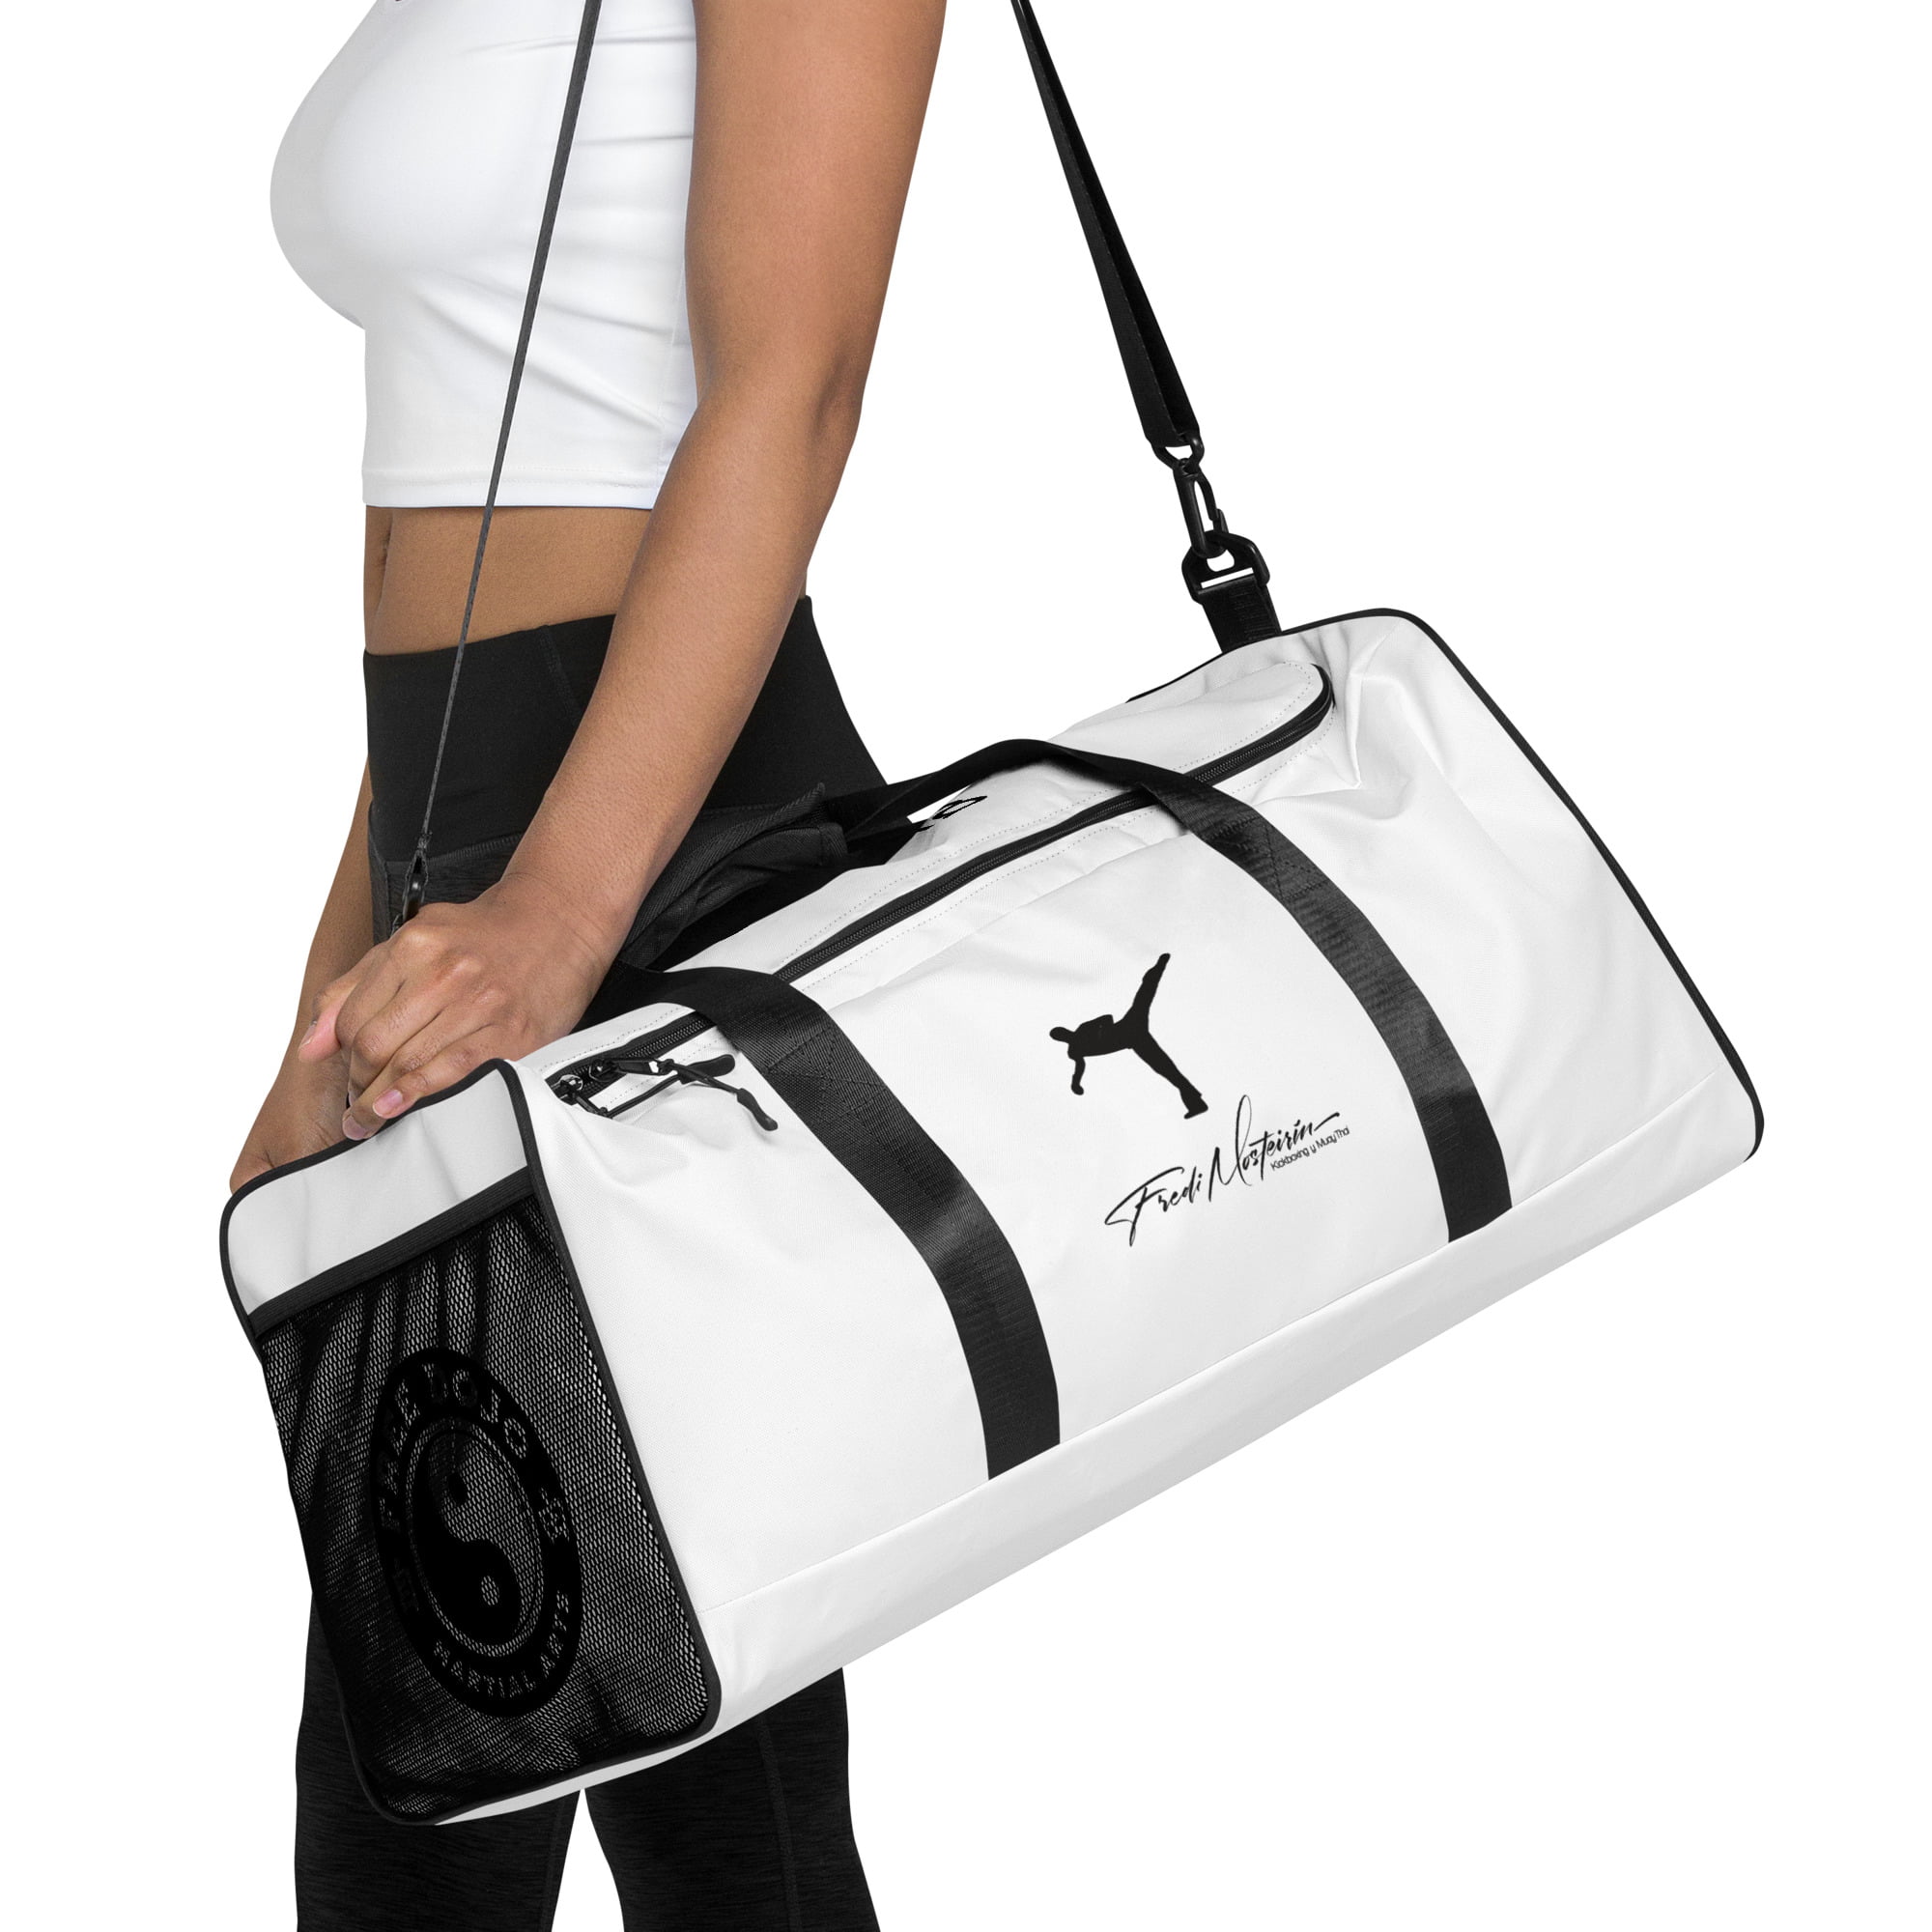 all-over-print-duffle-bag-white-front-64db67d40ff05.jpg